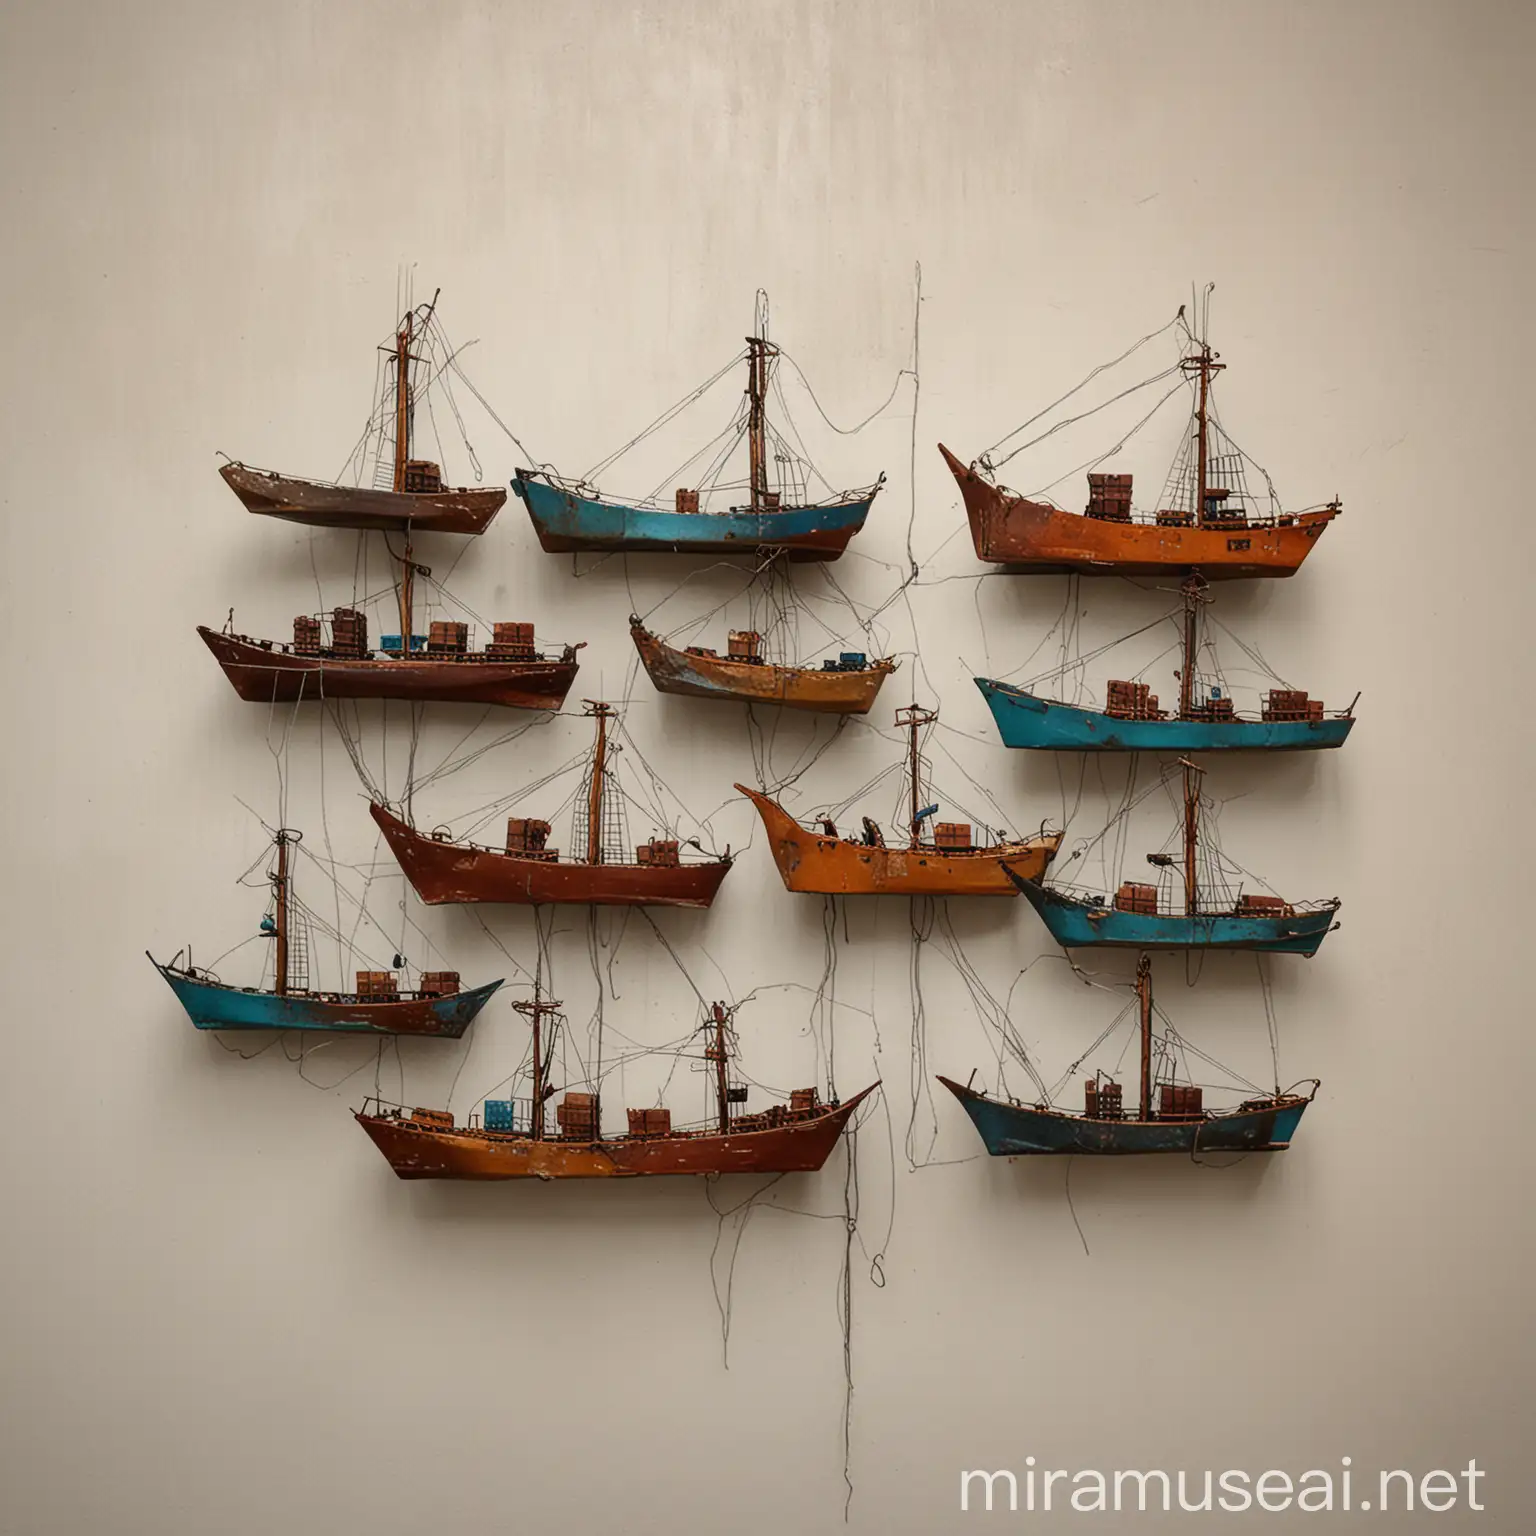 Minimalistic Wall Sculpture Abstracted Gulf Ships Connected with Wires